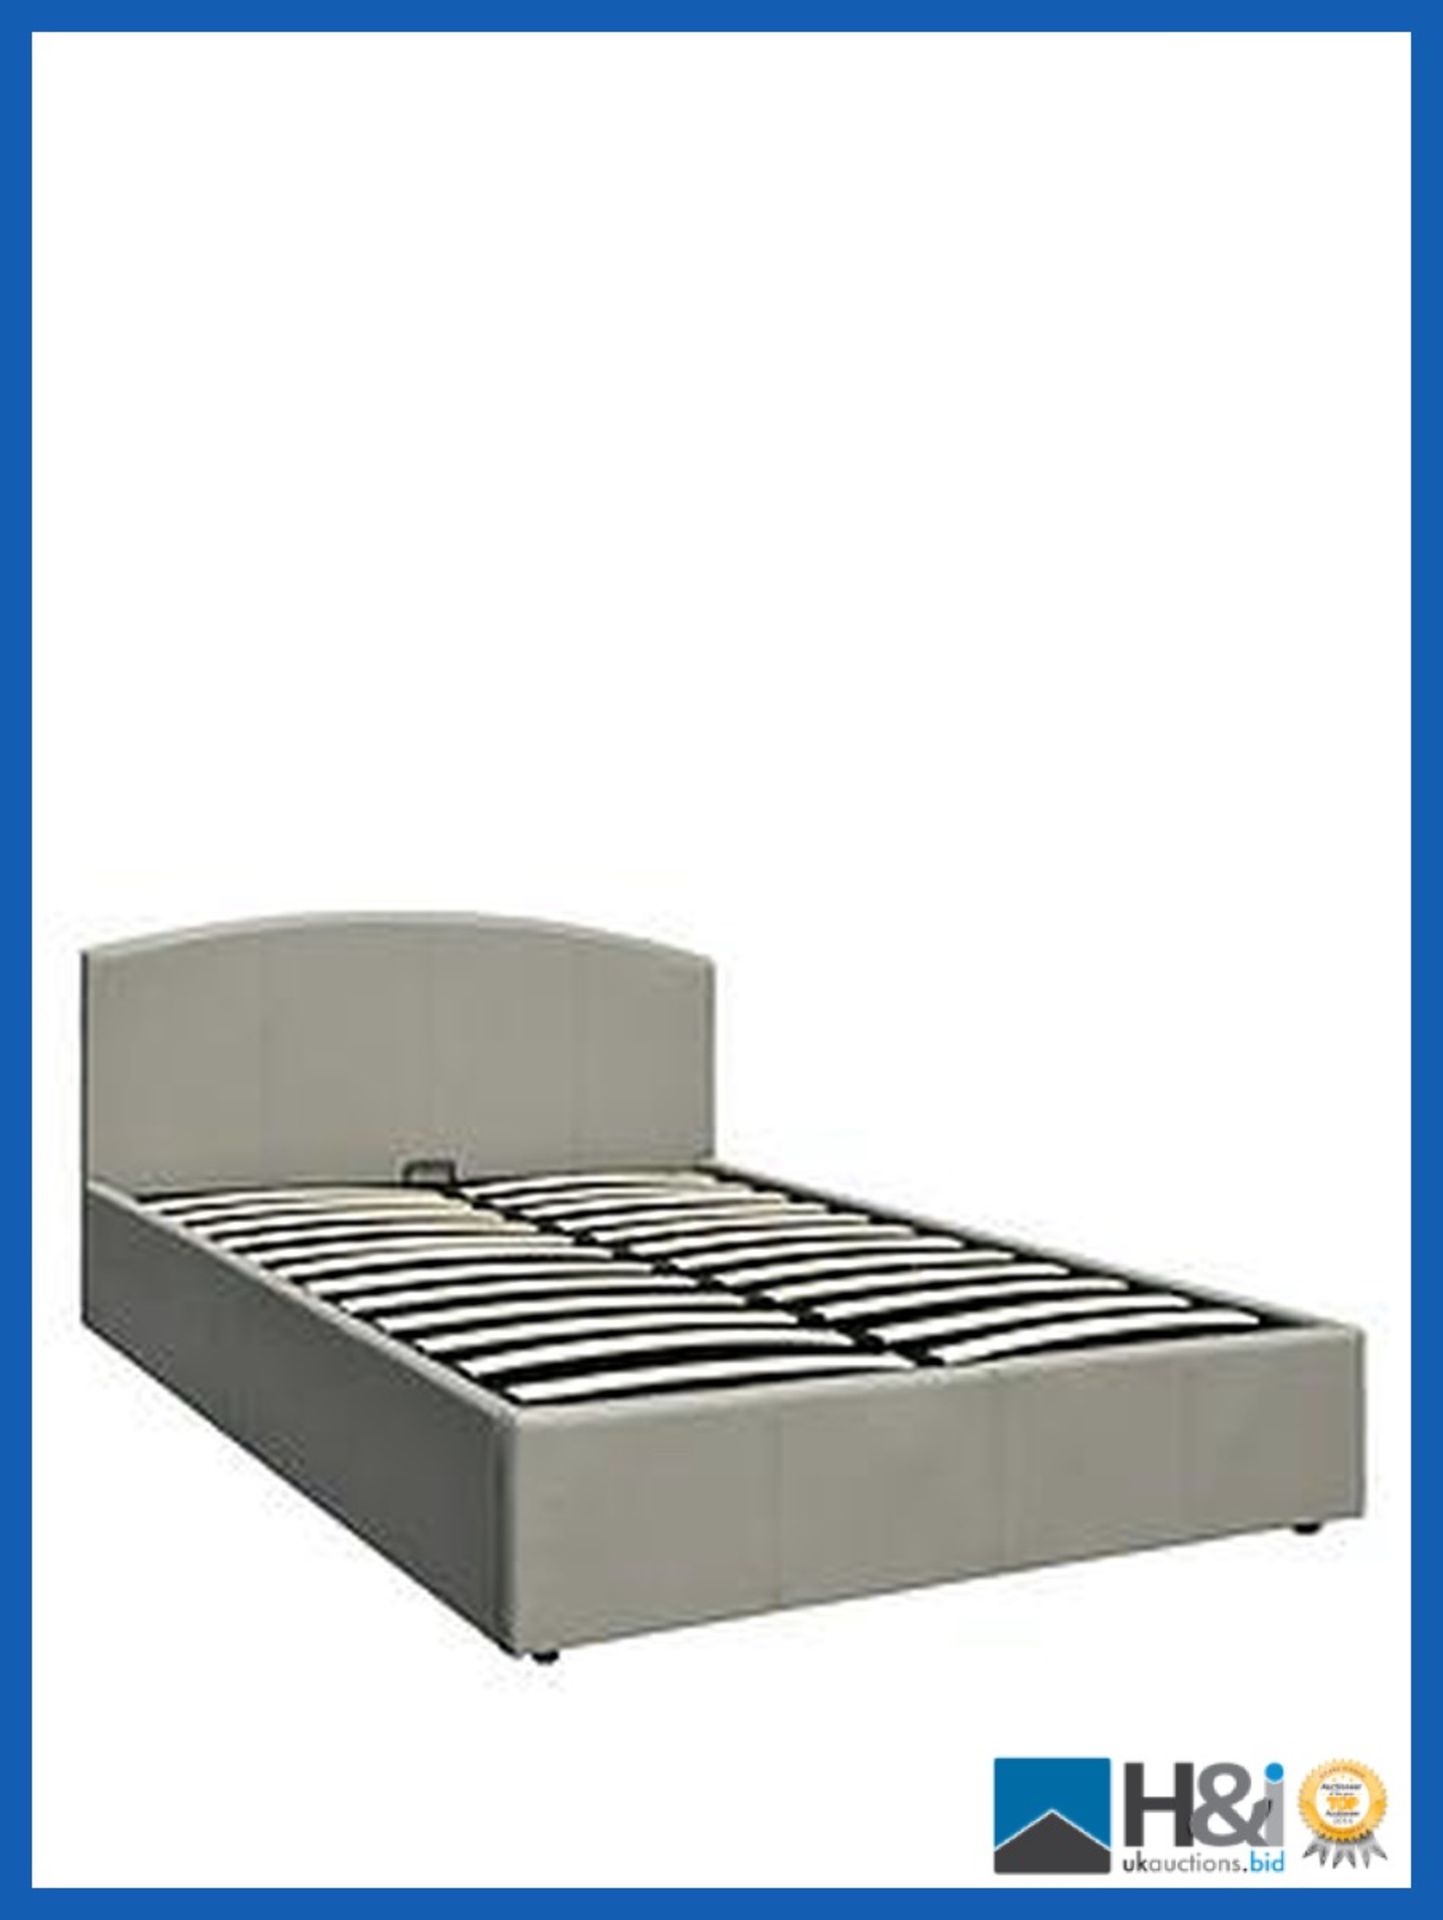 BOXED GRADE *A* ITEM MARSTON KING LIFT-UP BED [GREY] 88x159x212CM RRP:GBP 550.0